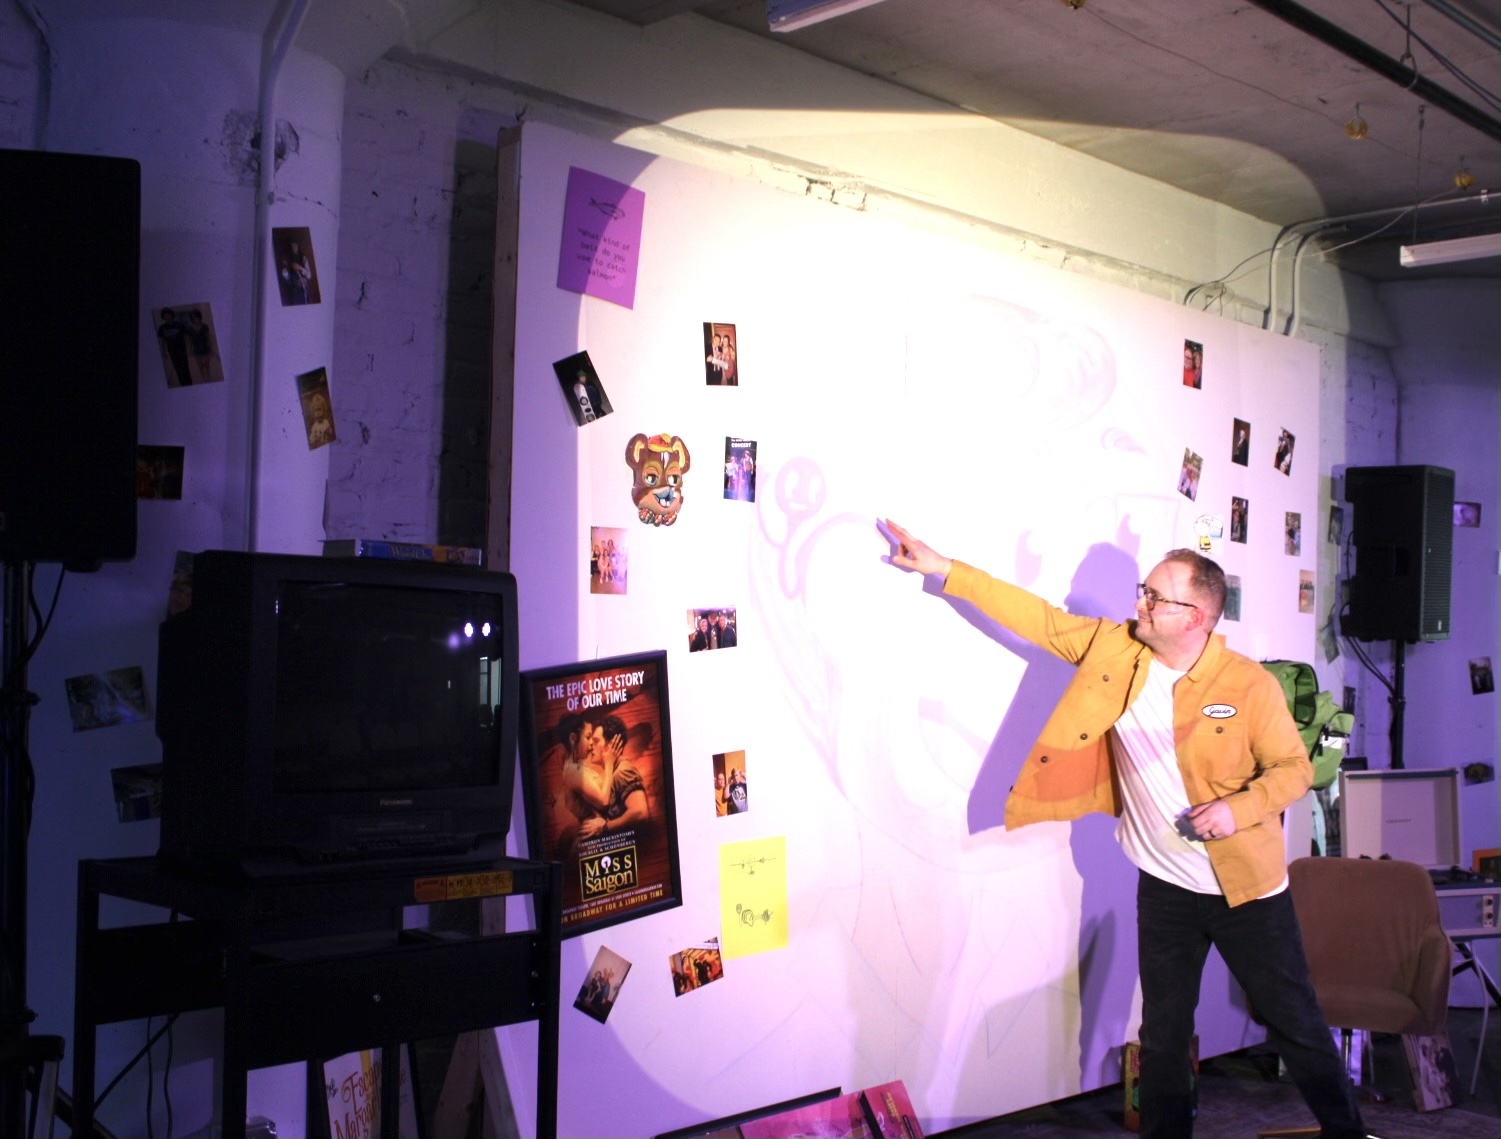 A person in a bright yellow jacket smiles and points to a spot on a large white wall lined with photos and a promotional poster for Miss Saigon. There is what appears to be a cartoon face of a large duck projected on the wall with a light projector.